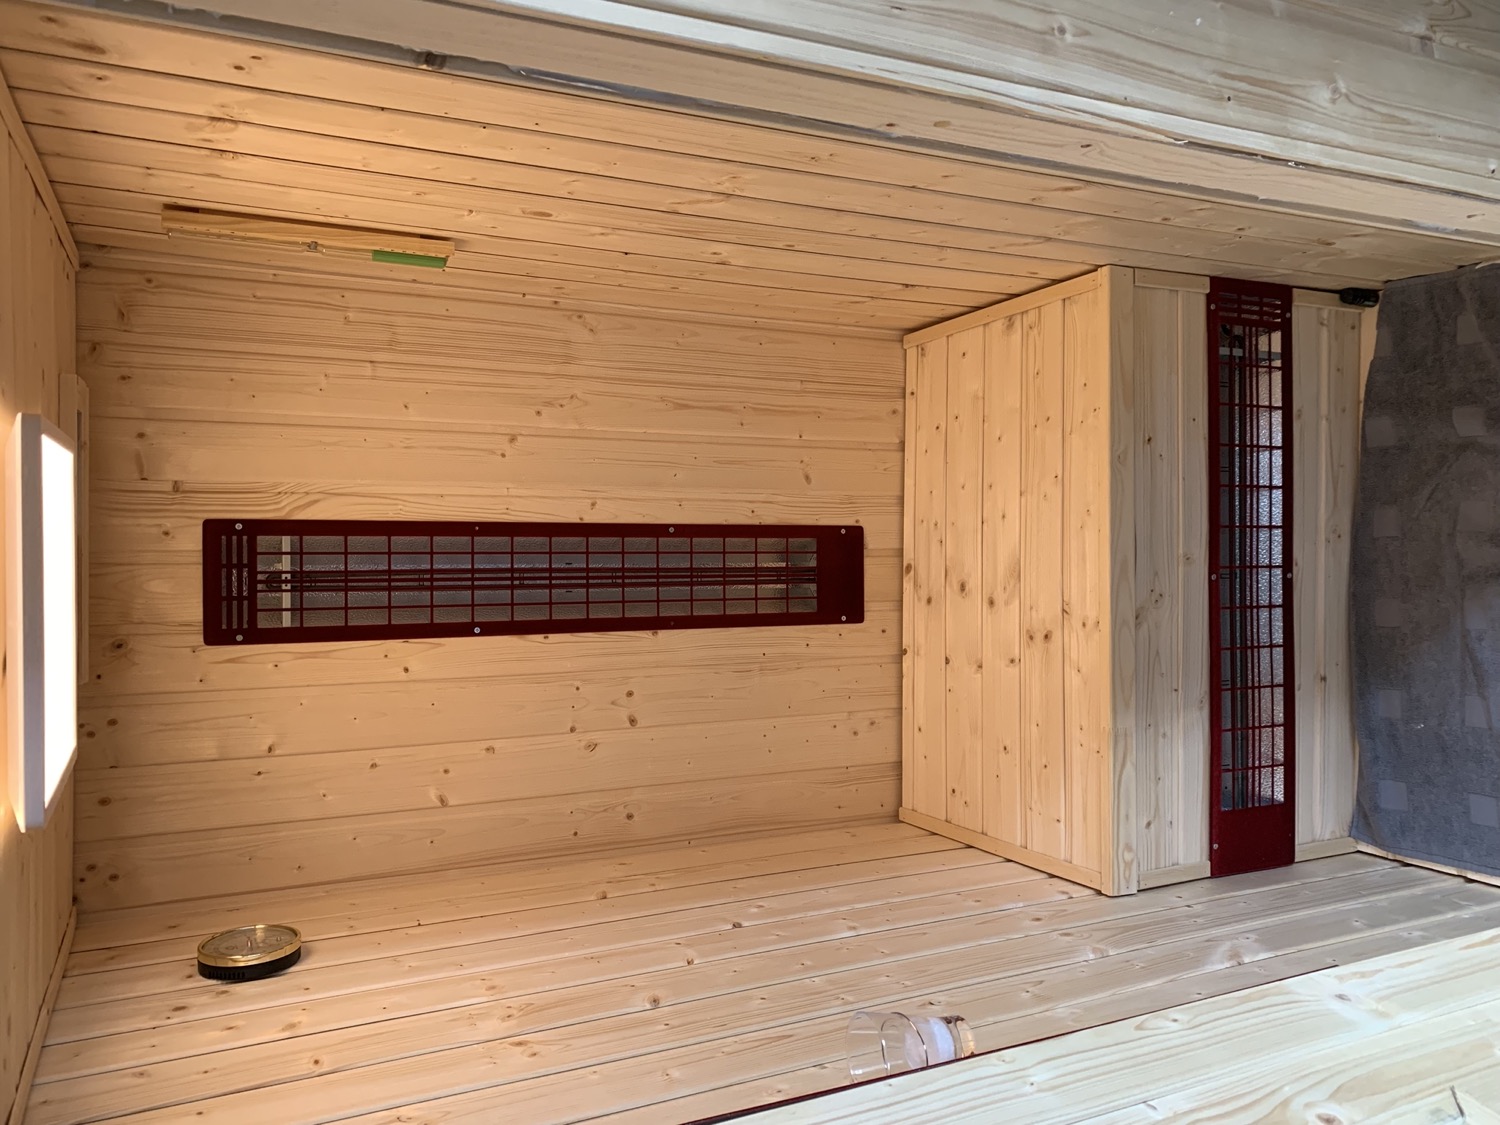 Inside the fully finished sauna